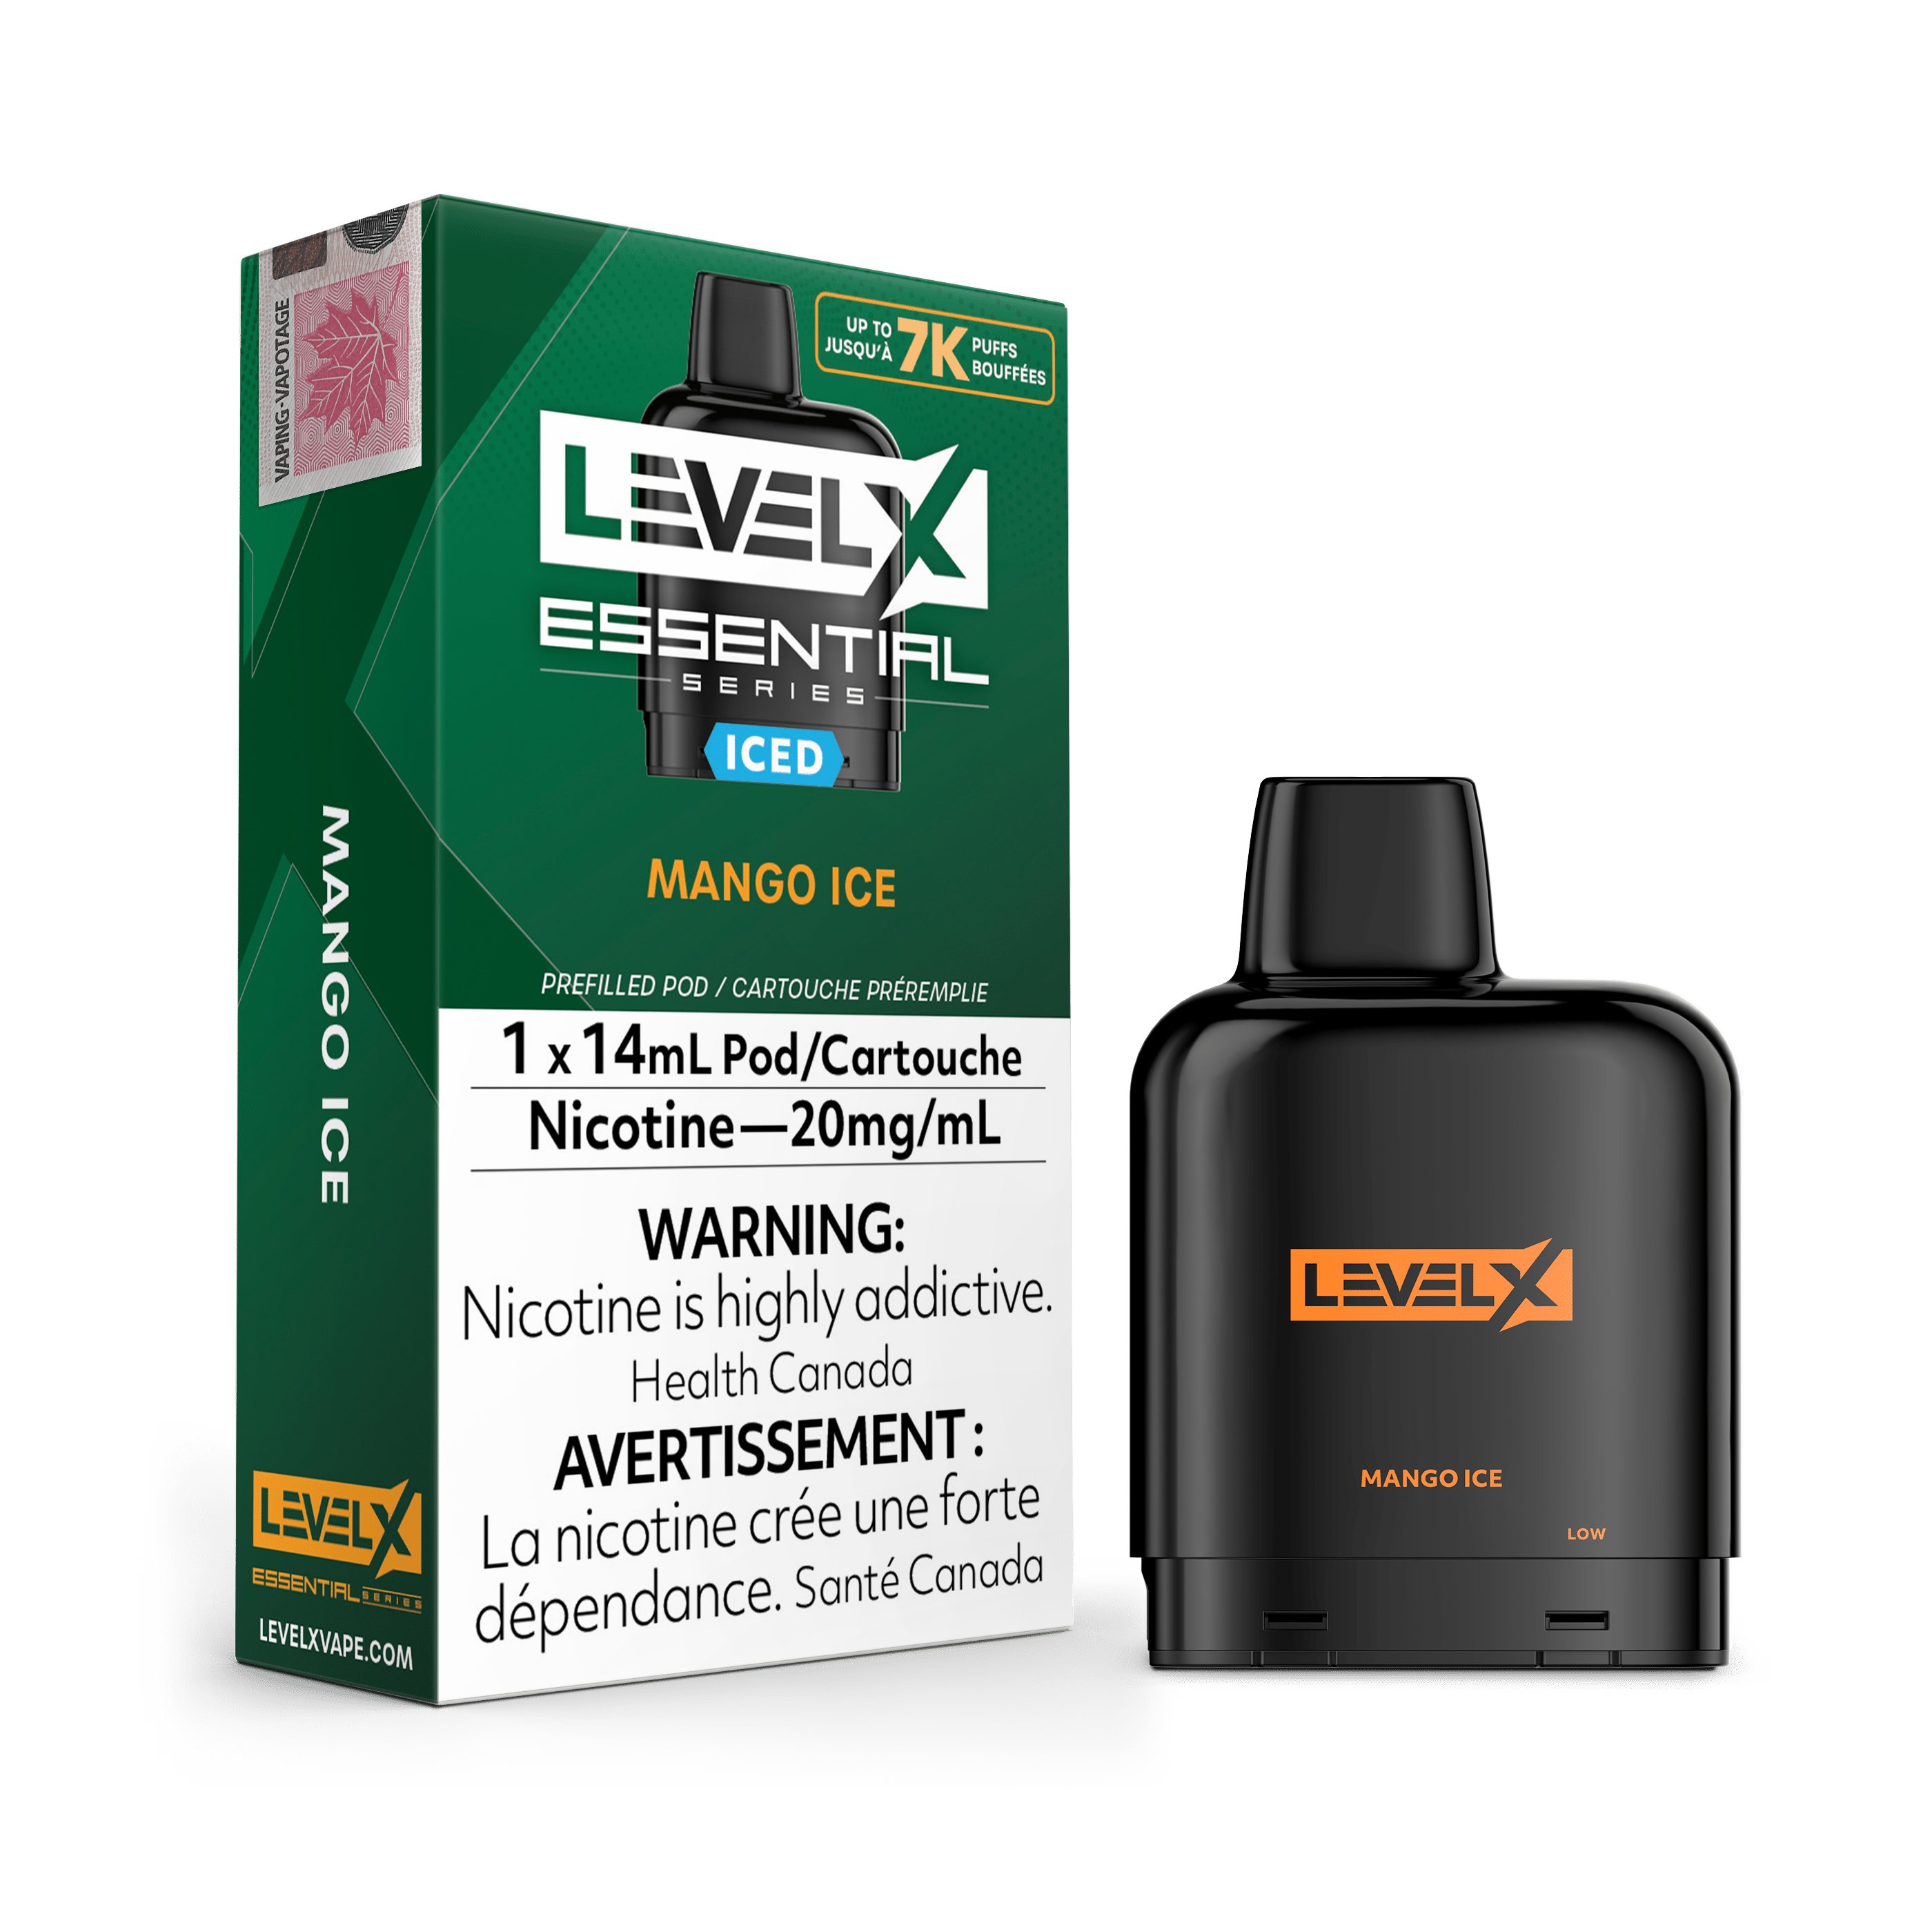 Level X Essential Series Pod - Mango Ice available on Canada online vape shop